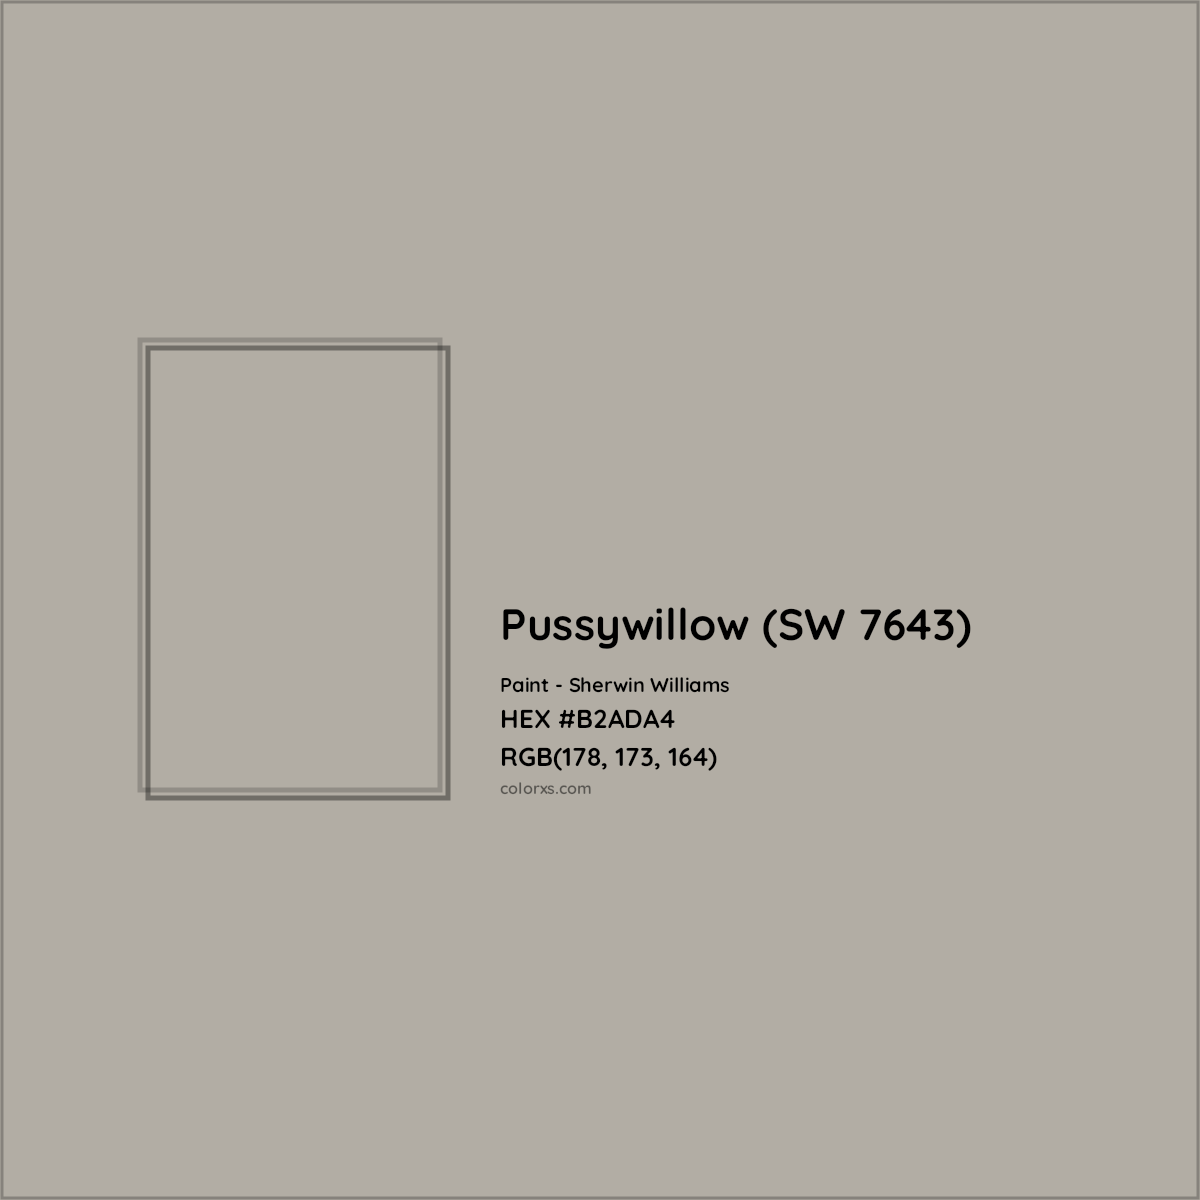 HEX #B2ADA4 Pussywillow (SW 7643) Paint Sherwin Williams - Color Code